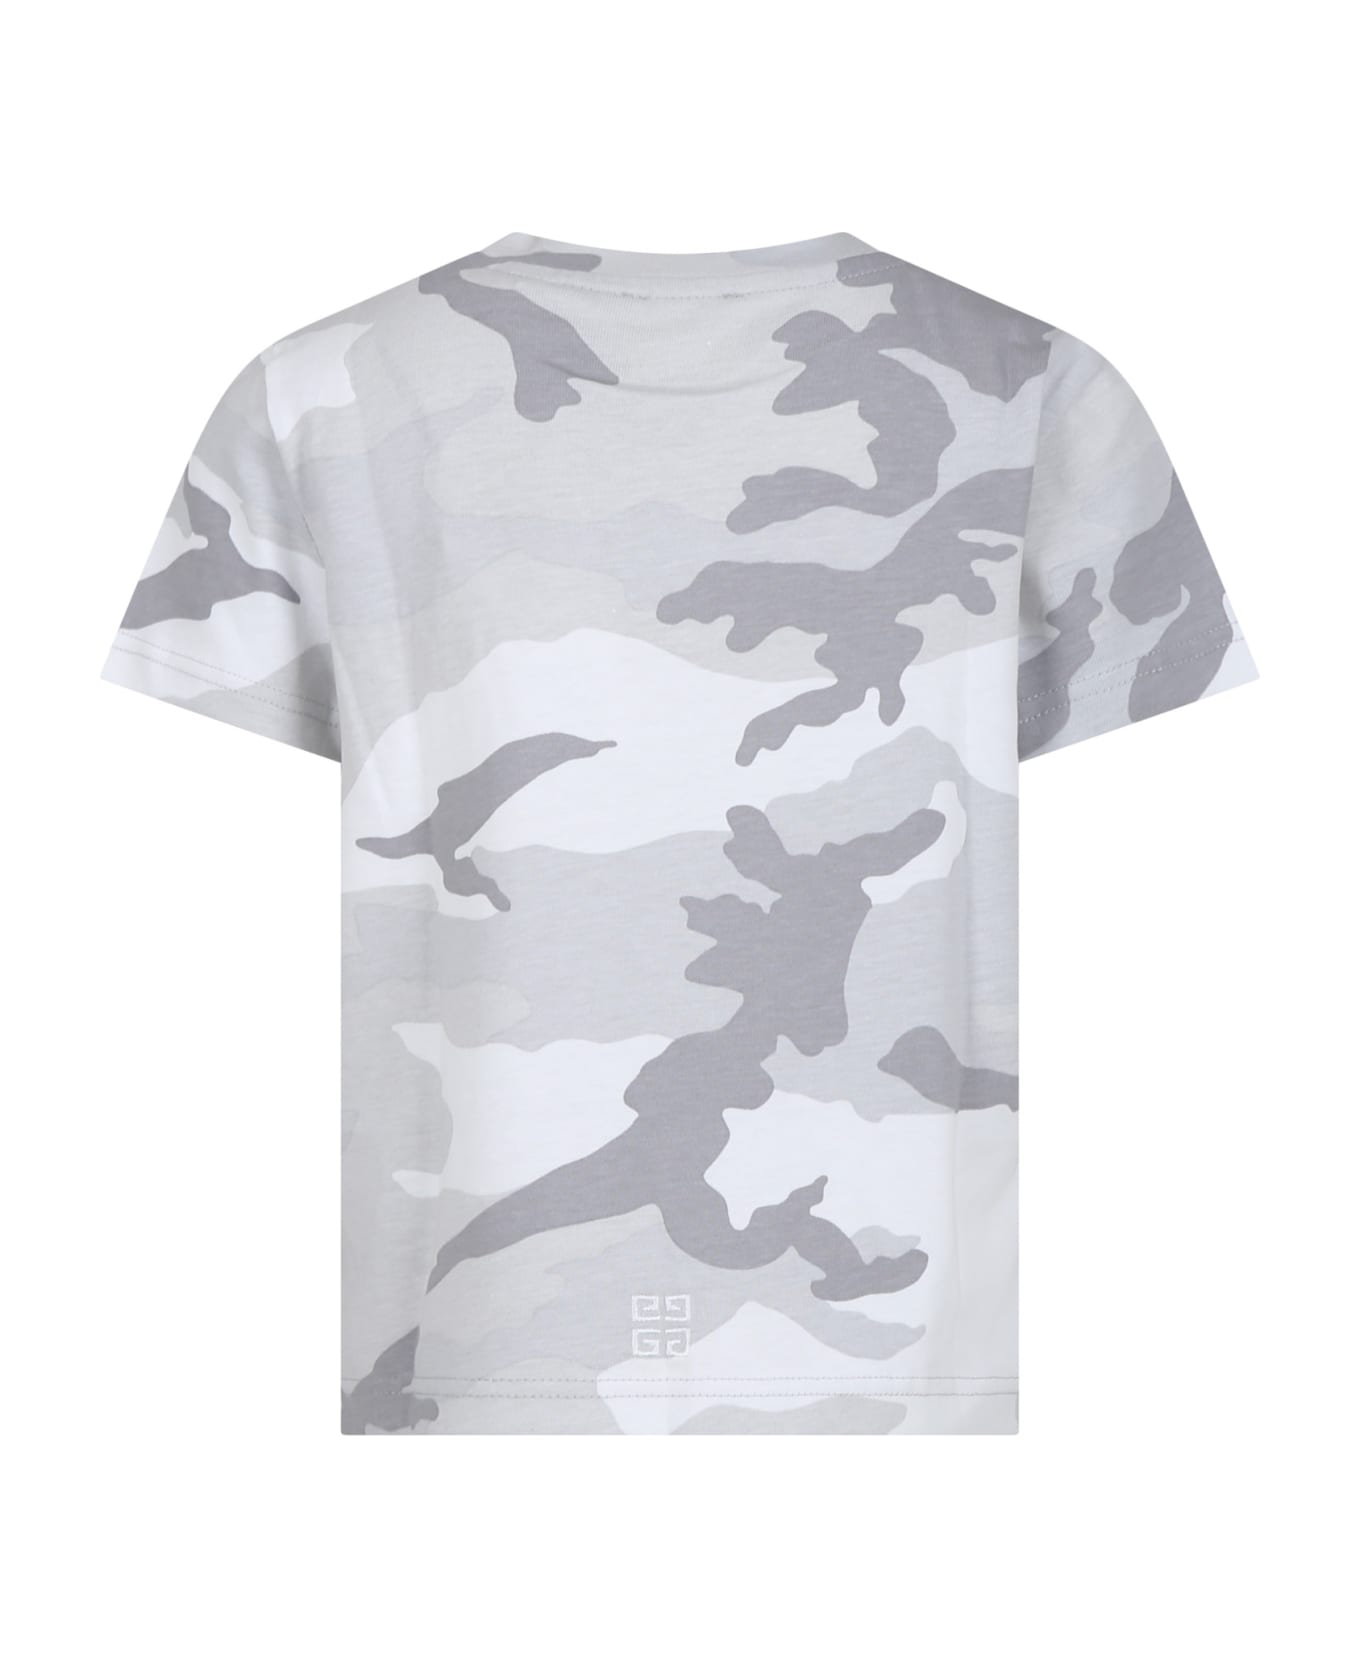 Givenchy Gray T-shirt For Boy With Camouflage Print - Grigio